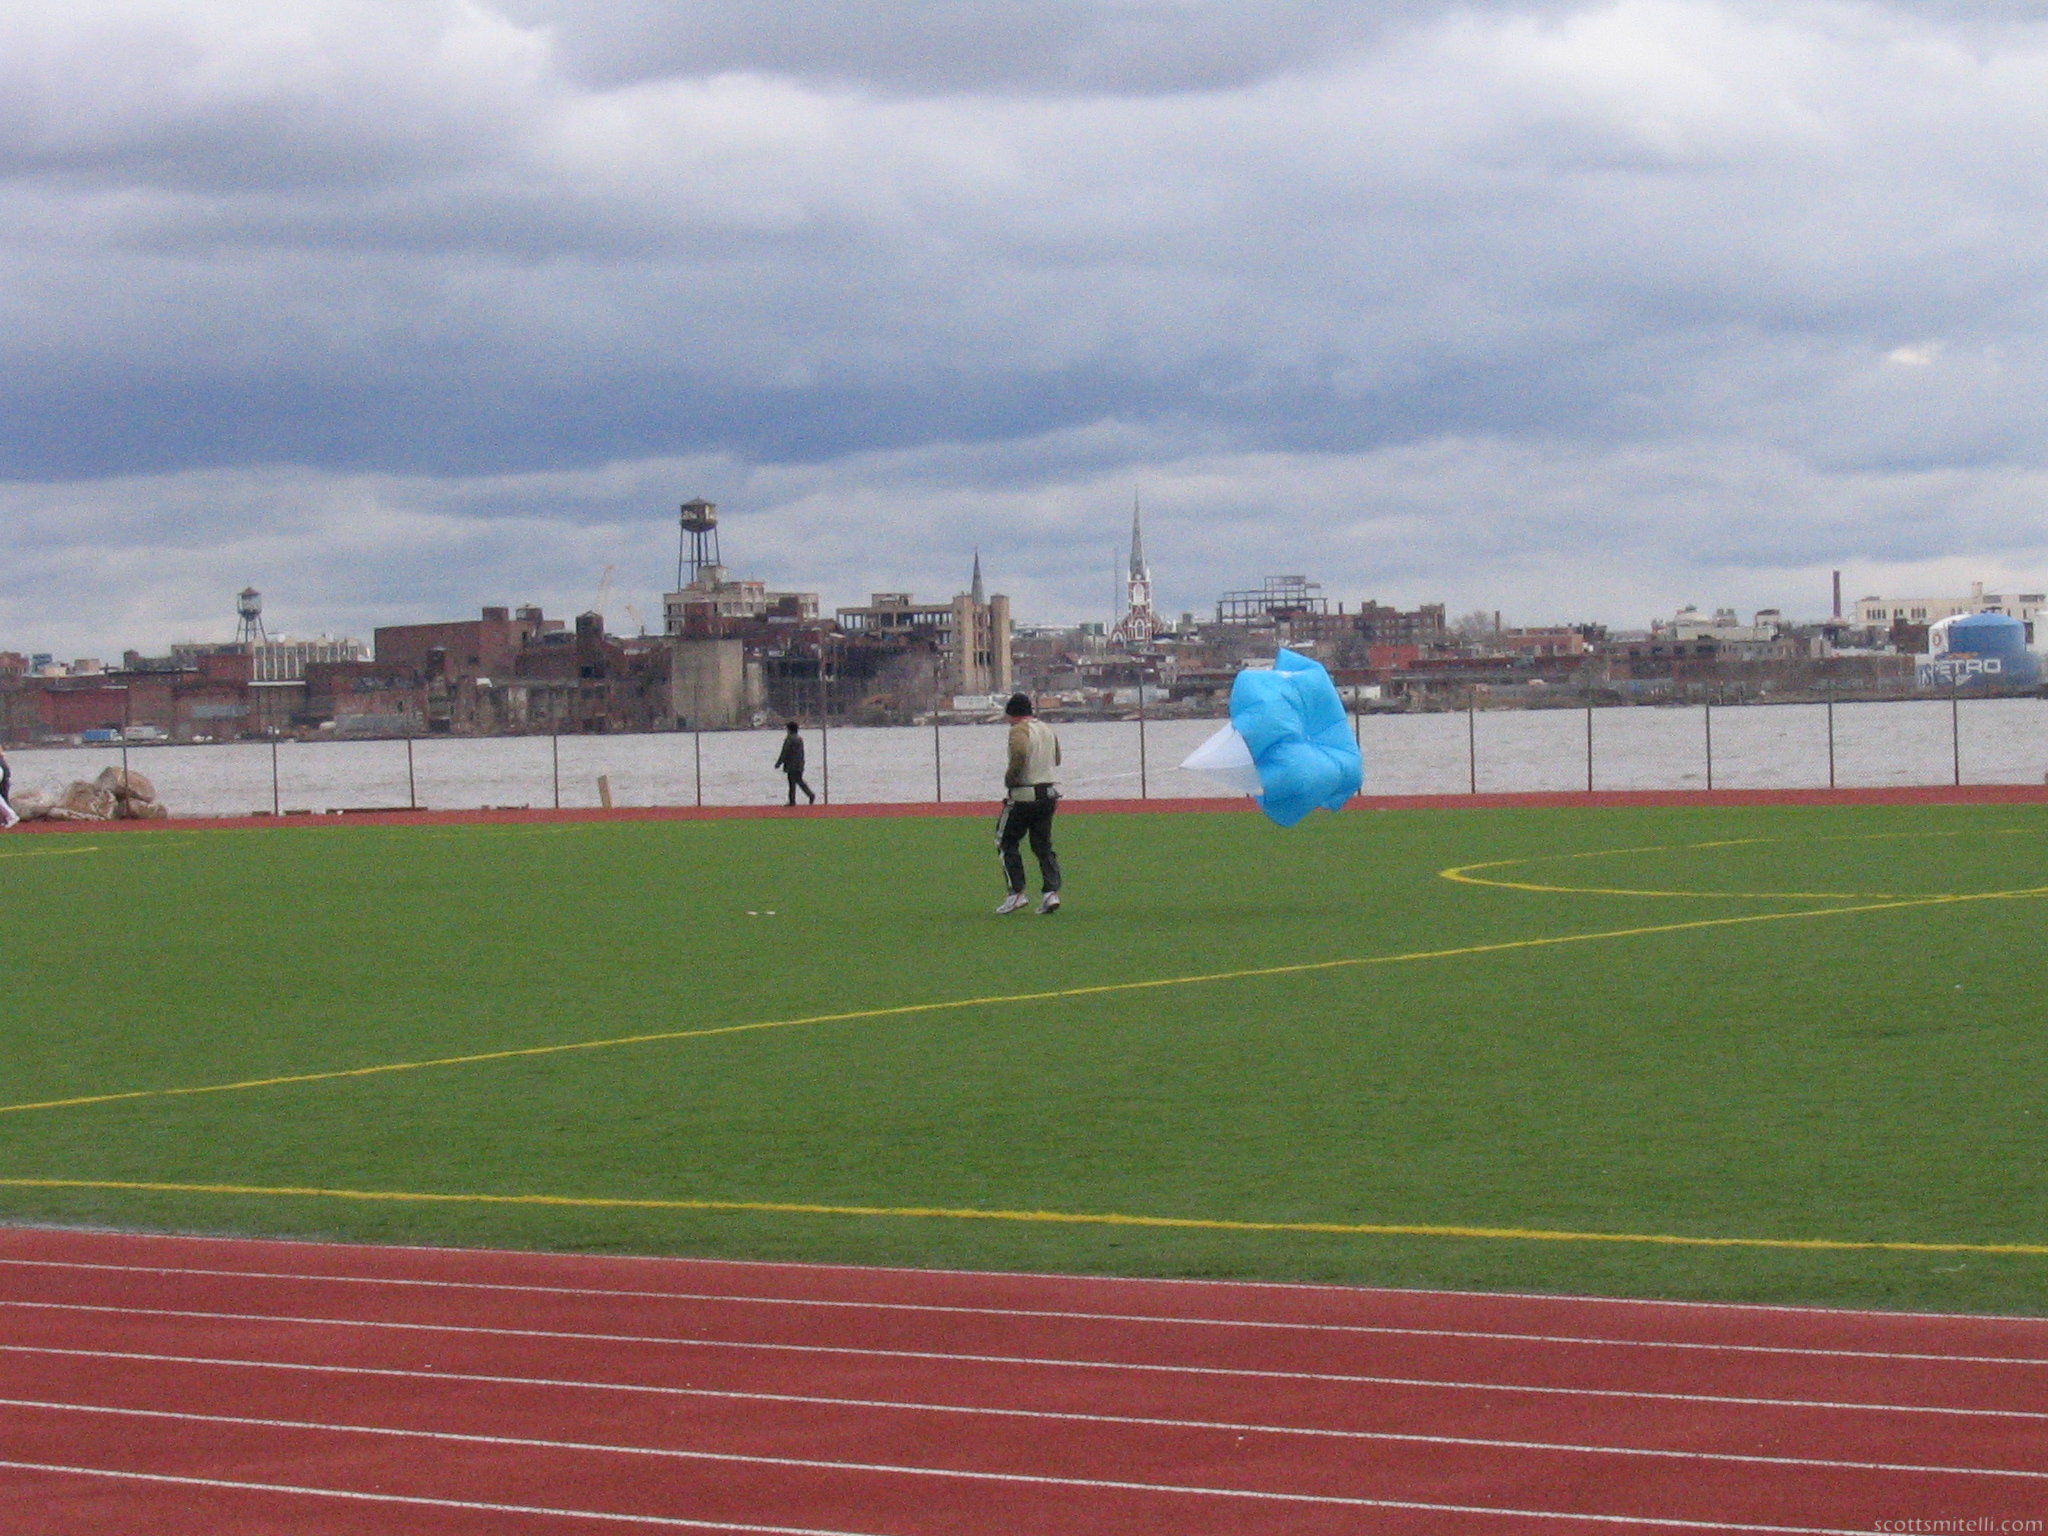 Some strange guy running with a parachute.